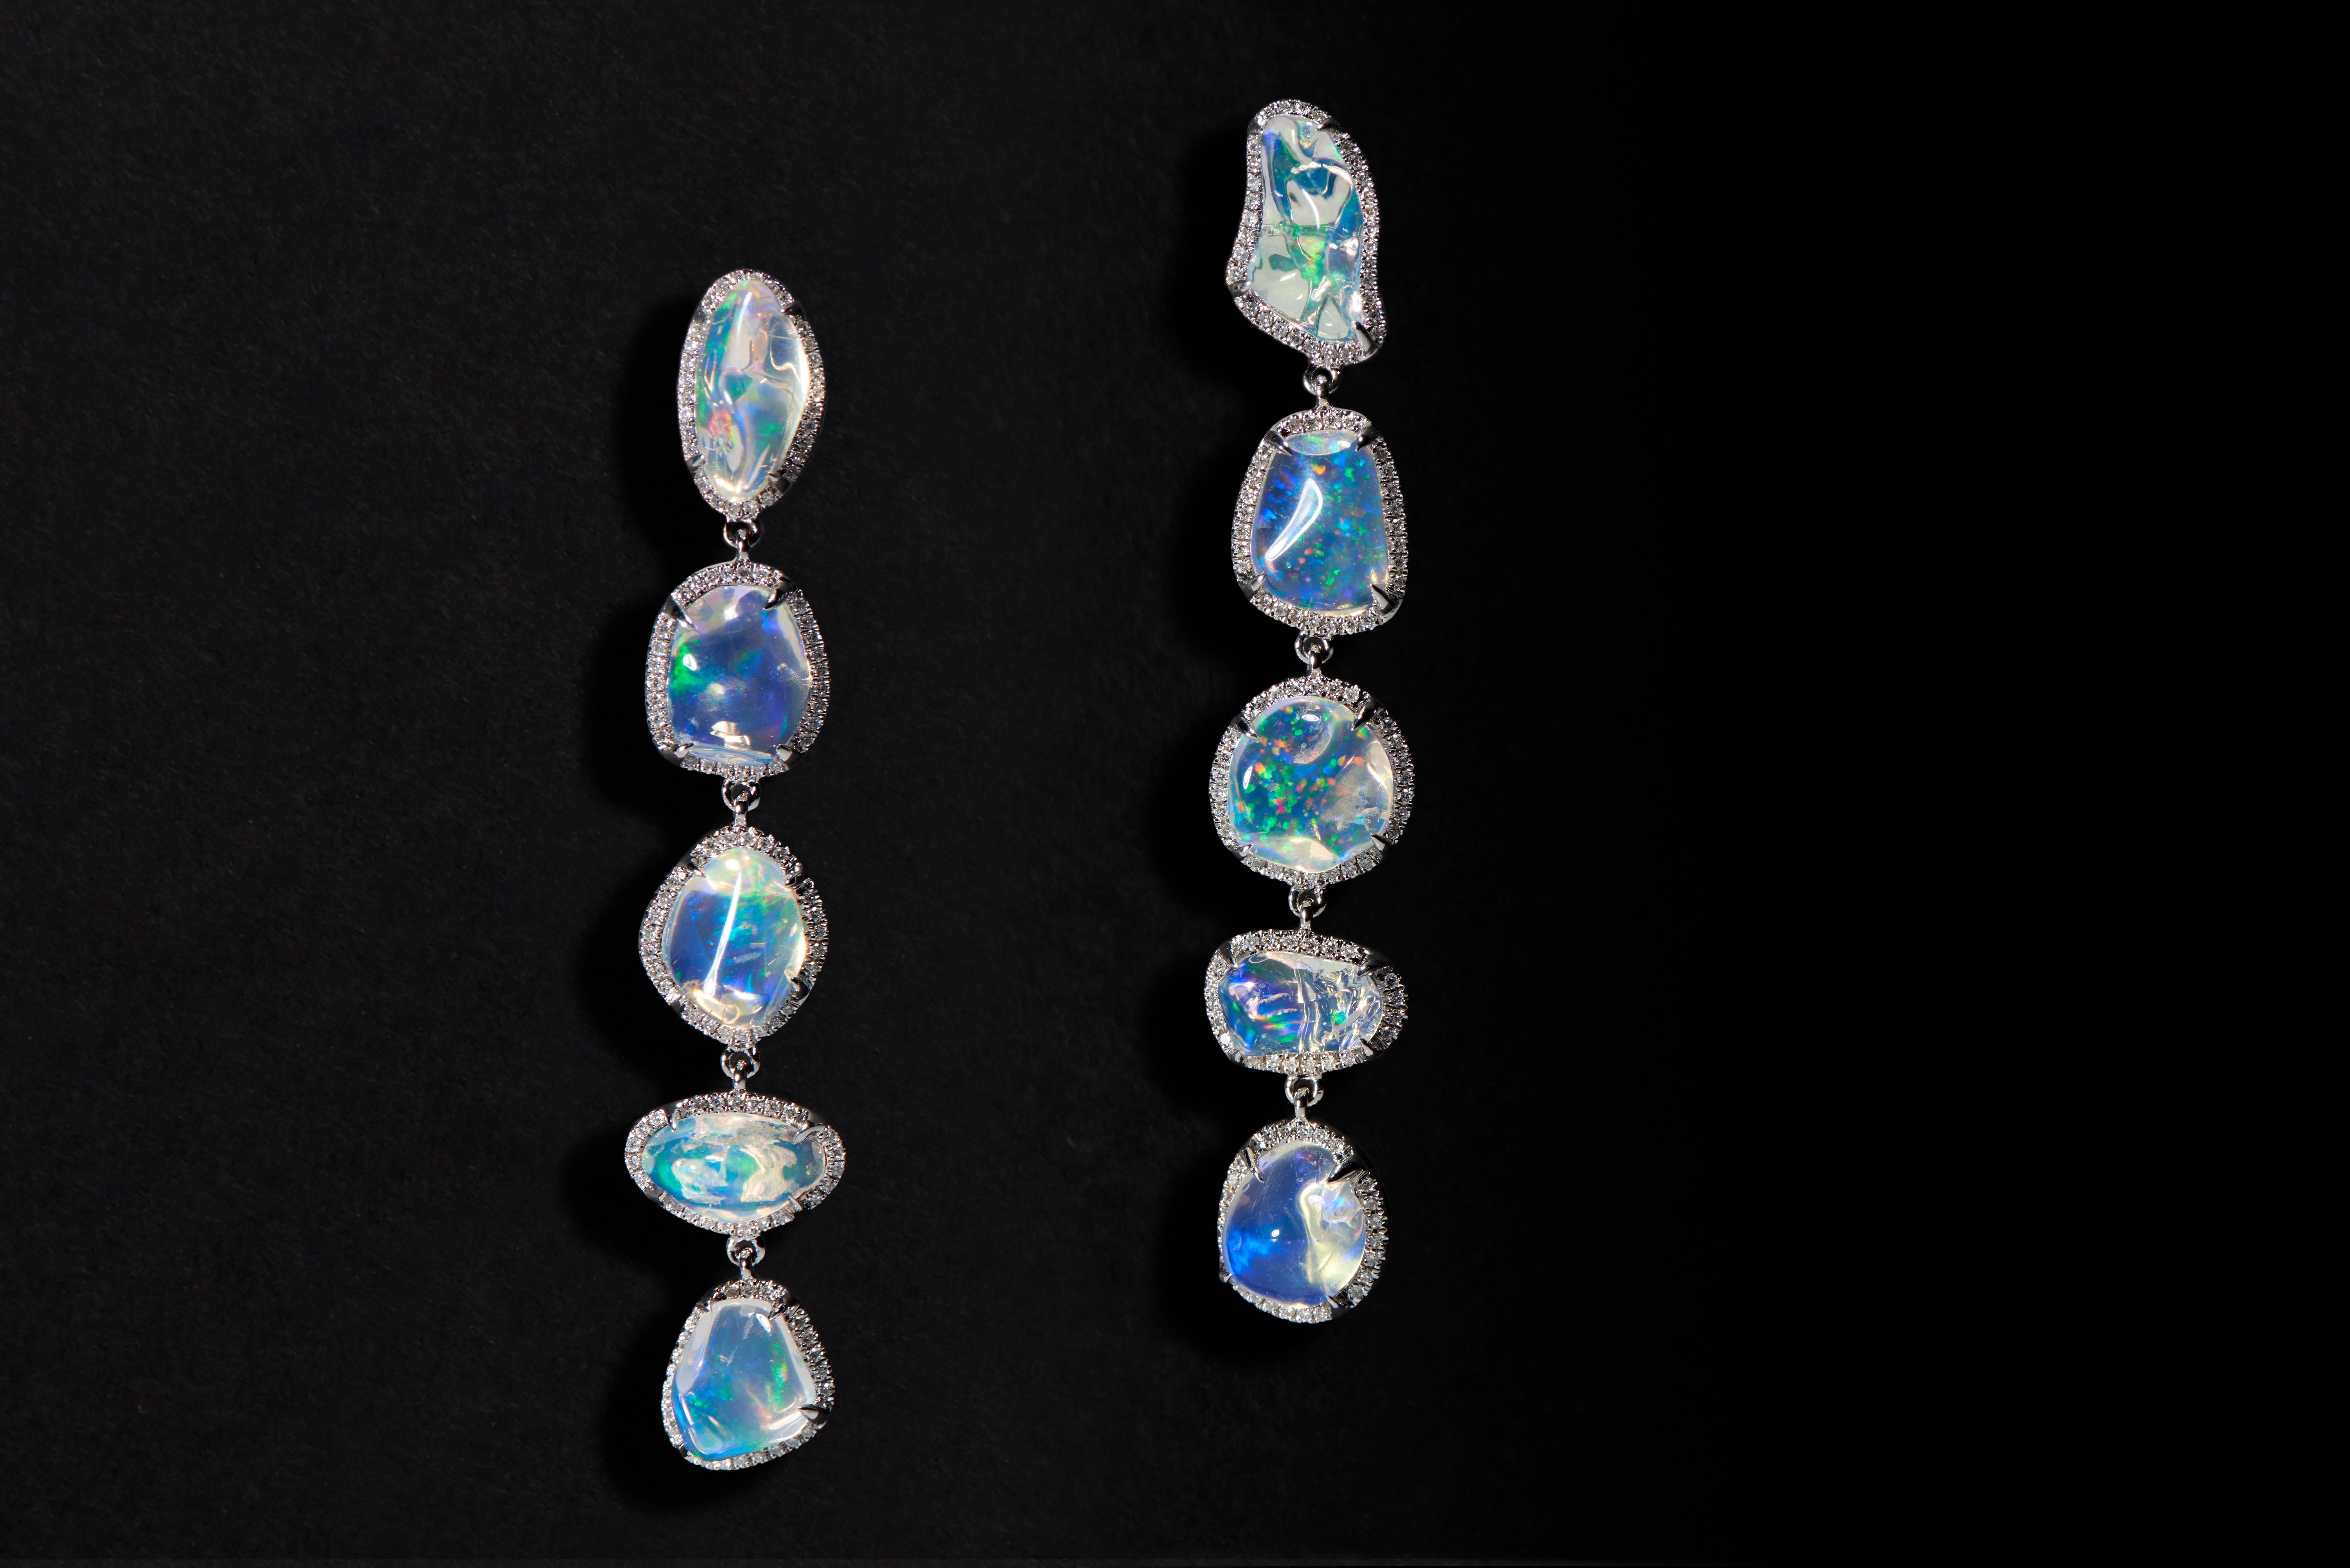 A dazzling chain of irregular shaped opals create a play of light and reflection, vividly rendering ethereal hues of blues, greens, and purples in Ri Noor's Ice Drops Linear Clear Fire Opal and Diamond Earrings. Evoking the contemporary jewelry